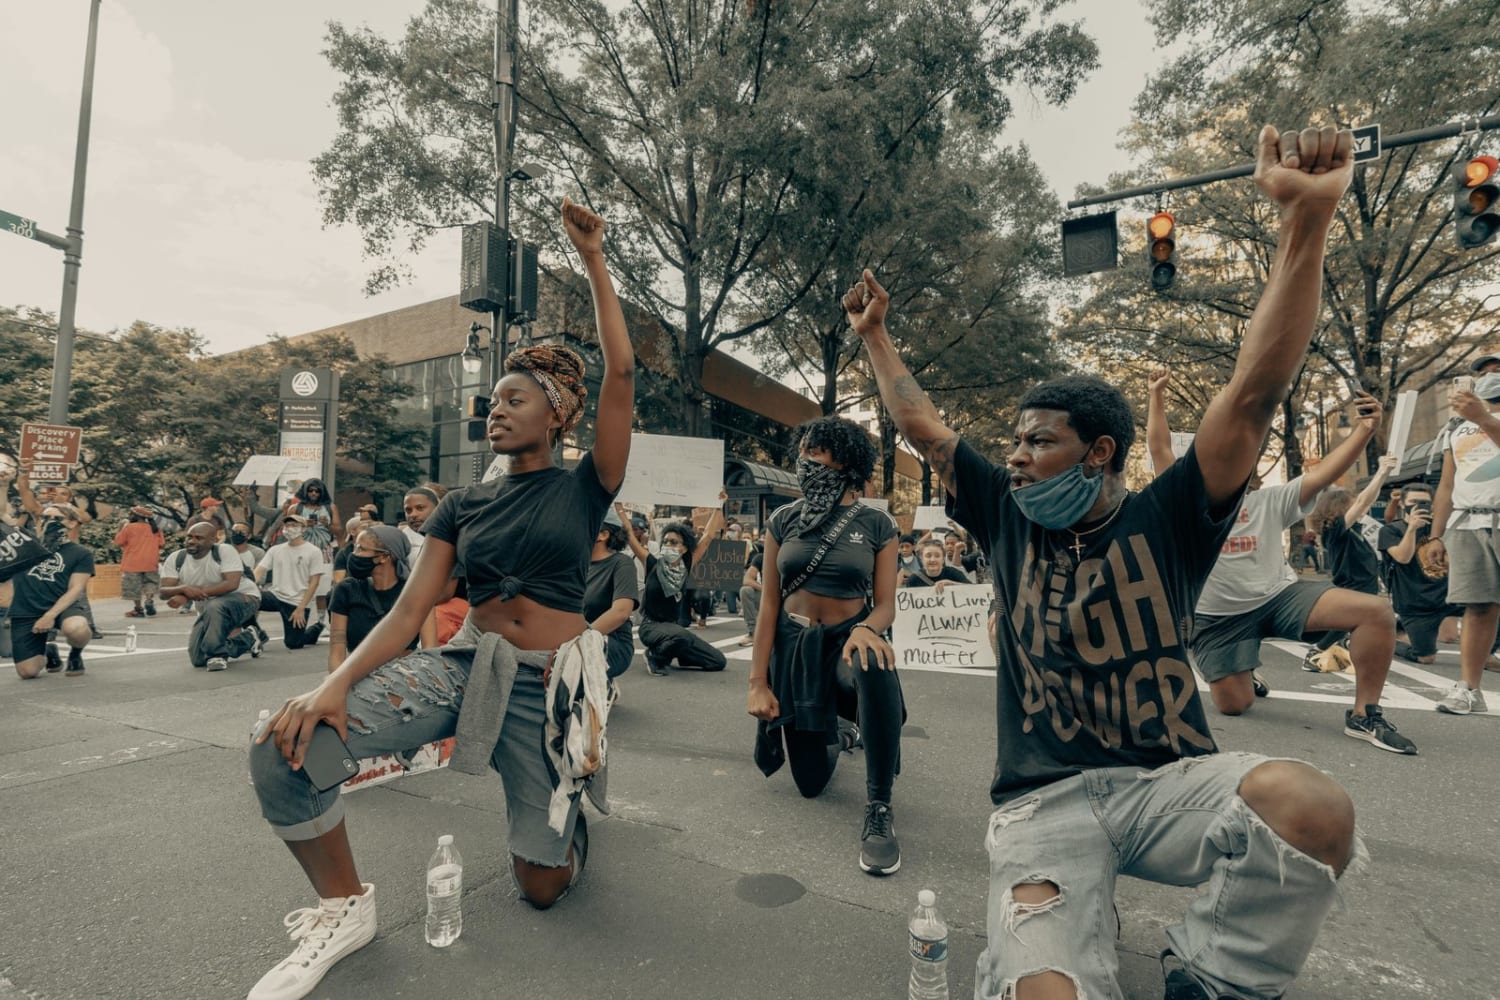 How to Support the Anti-Police Brutality and George Floyd Protests